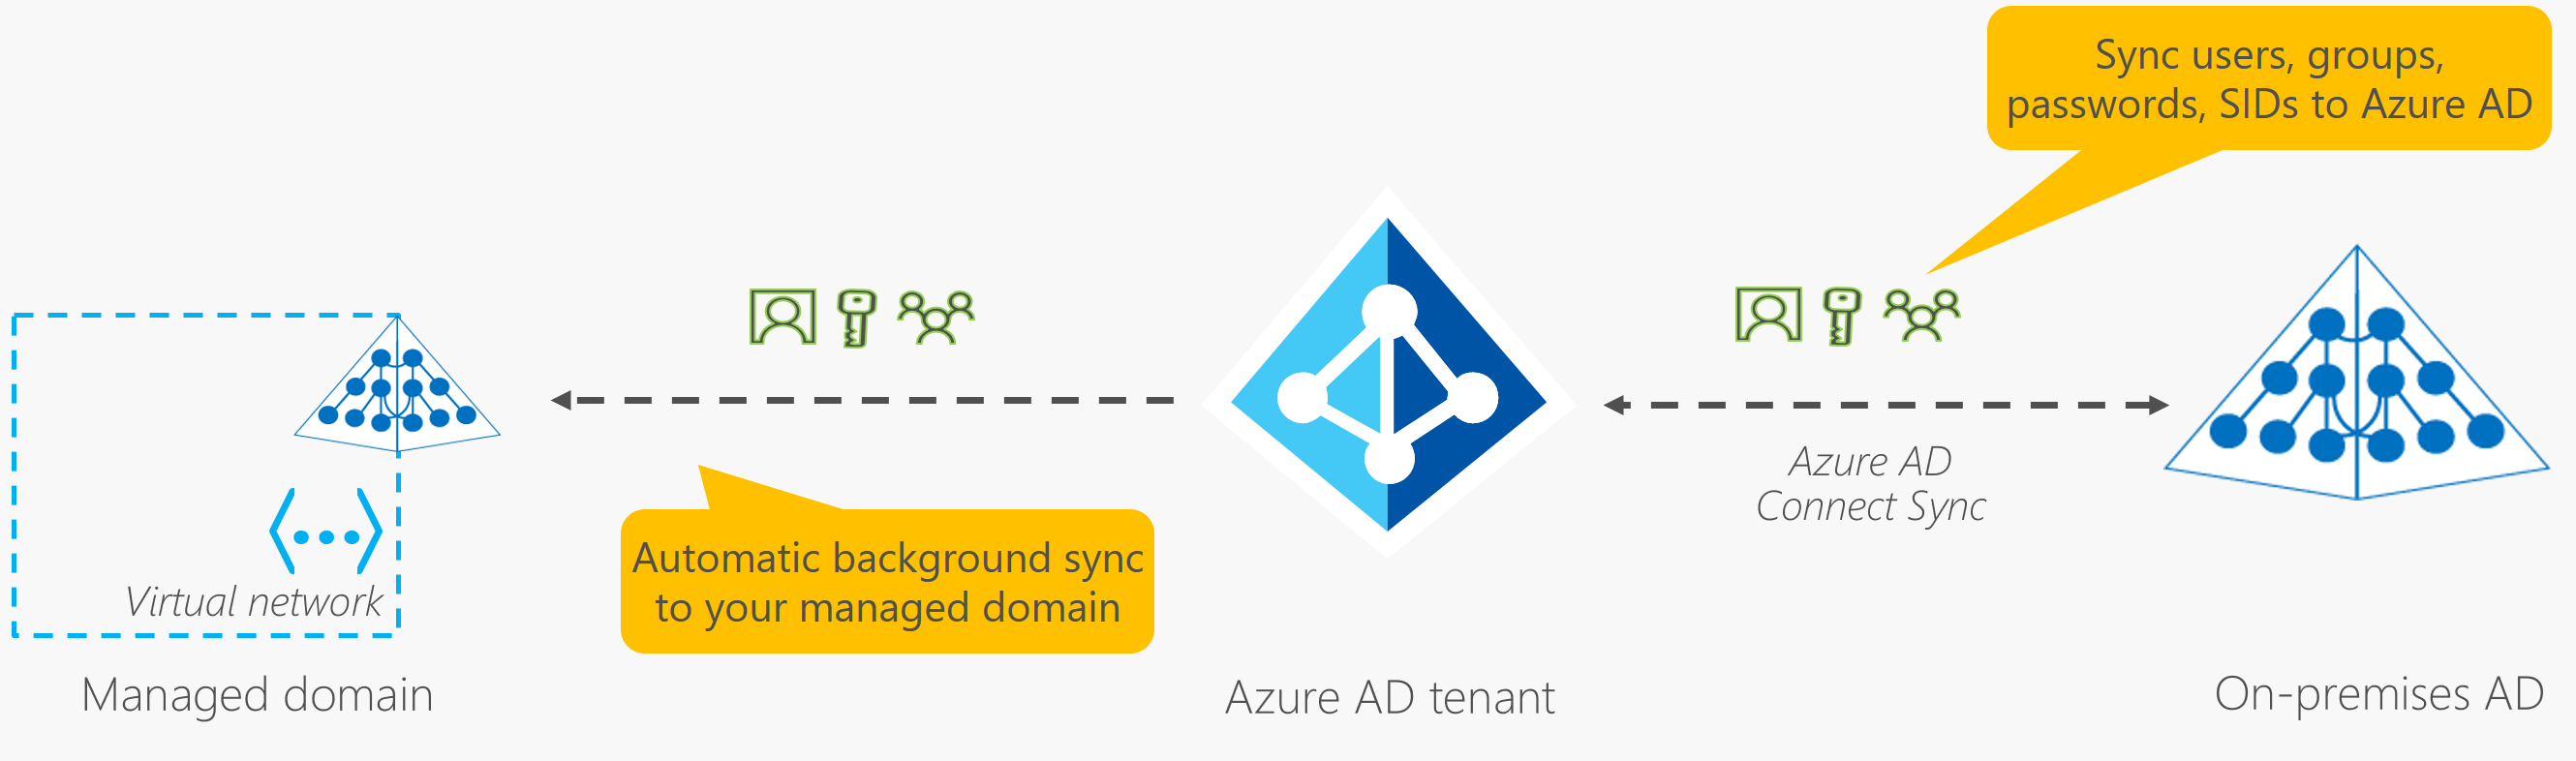 Synchronization in Azure AD Domain Services with Azure AD and on-premises AD DS using AD Connect